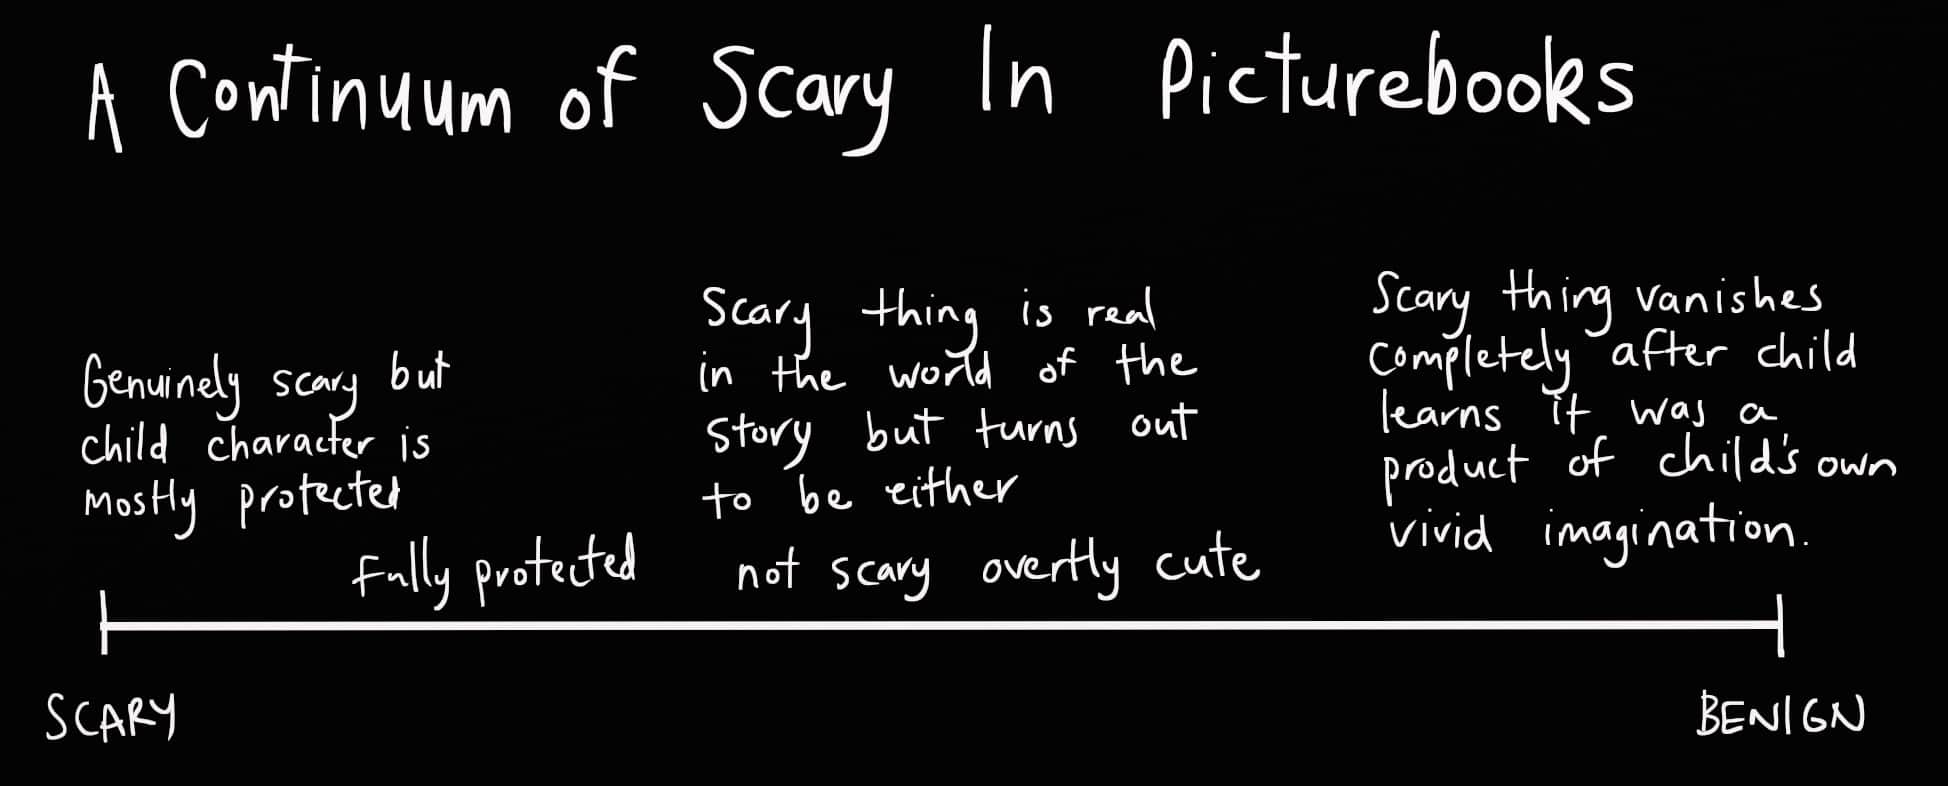 Continuum Of Scary In Picturebooks